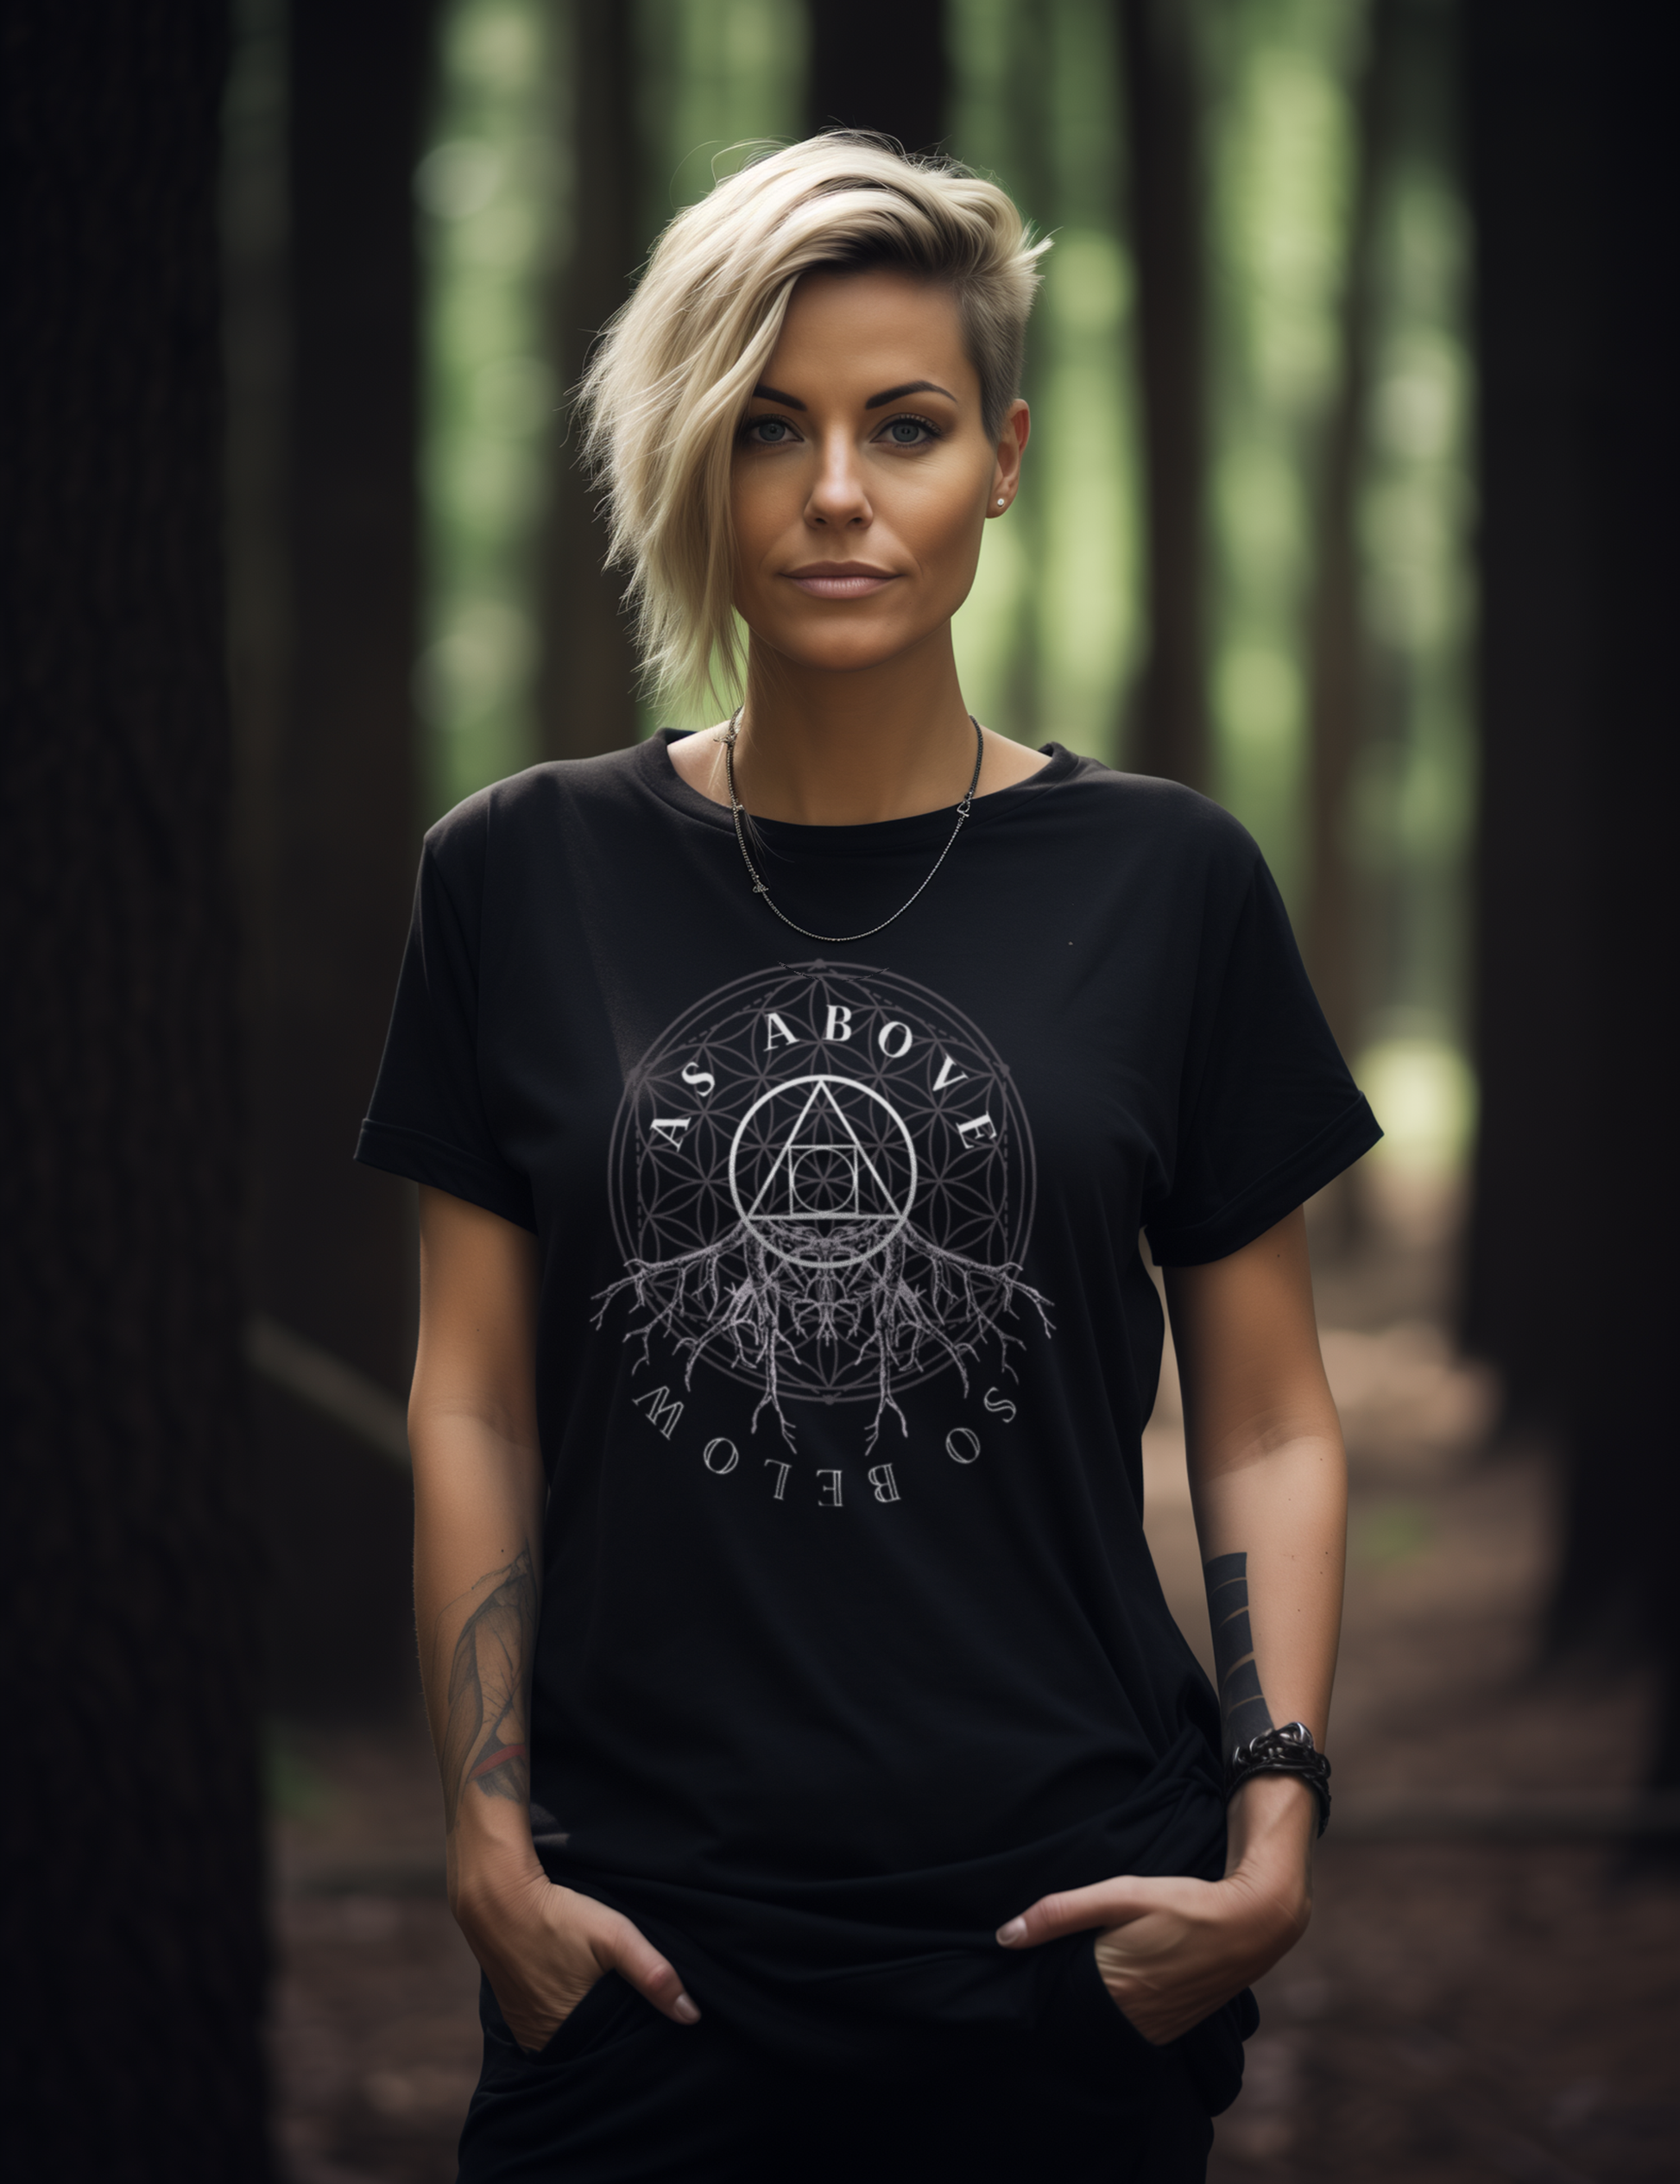 As Above So Below Esoteric Occult Shirt